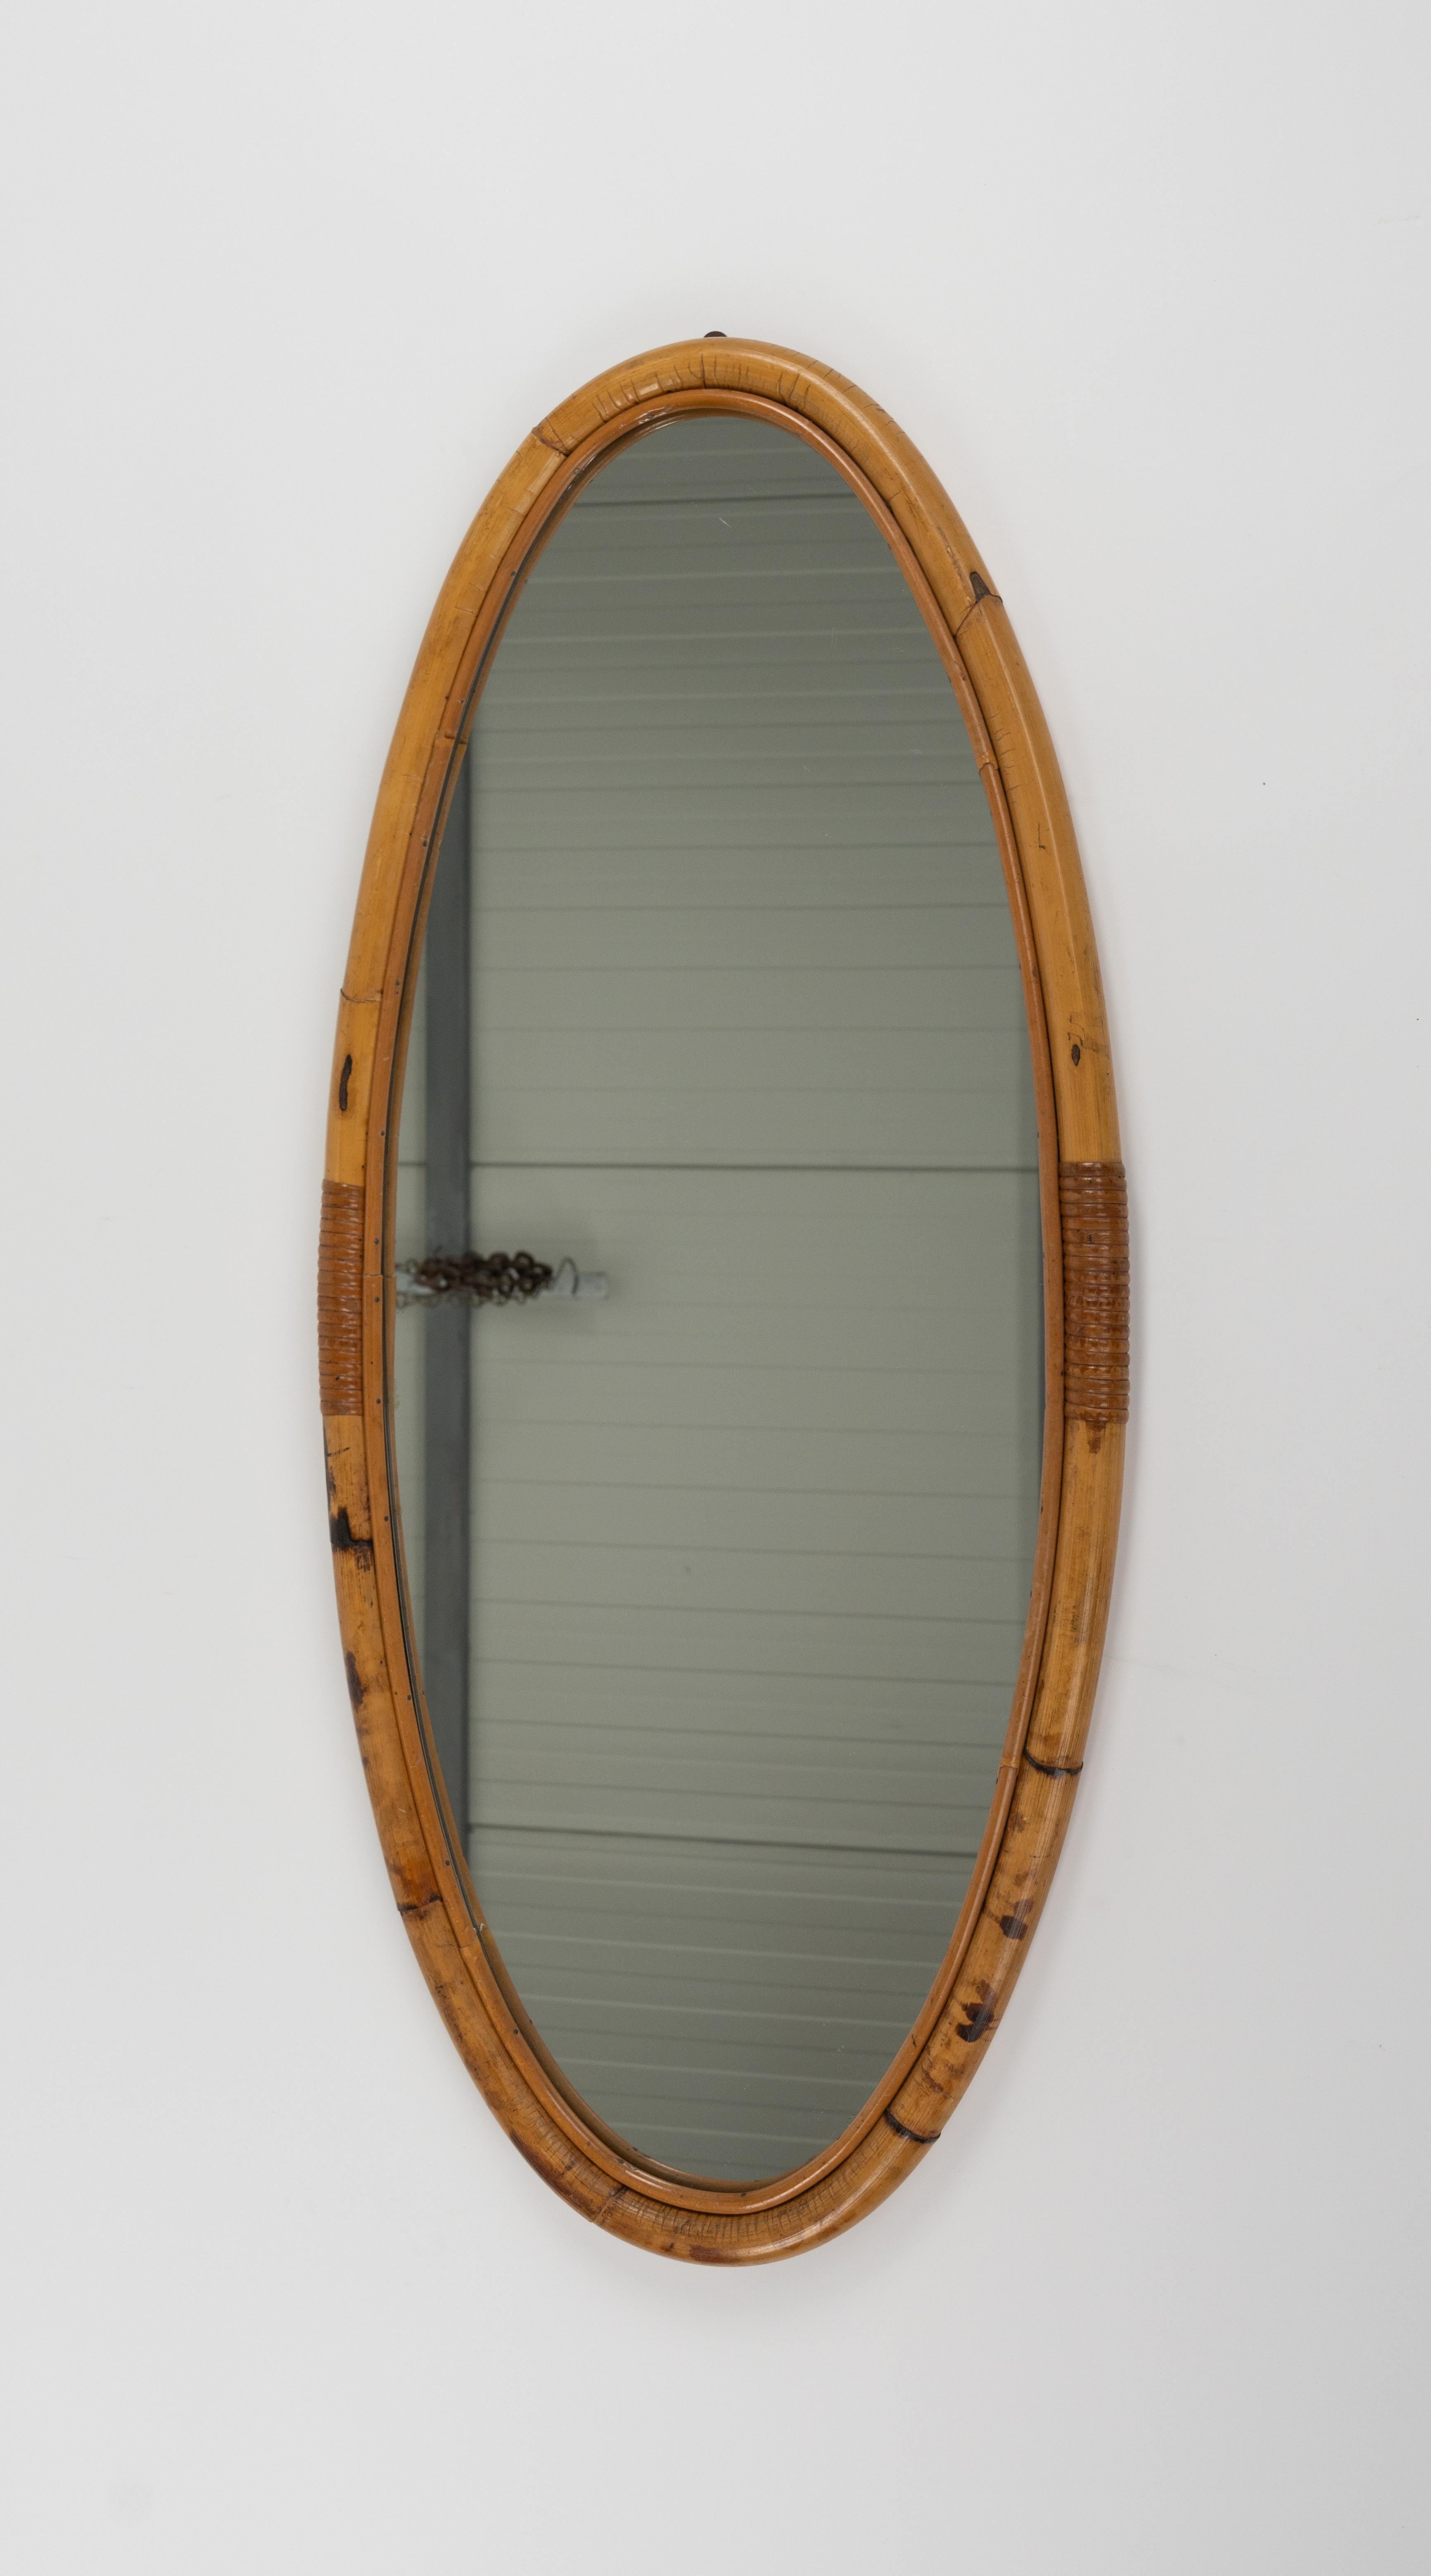 Midcentury Bamboo and Rattan Oval Wall Mirror, Italy 1970s For Sale 4